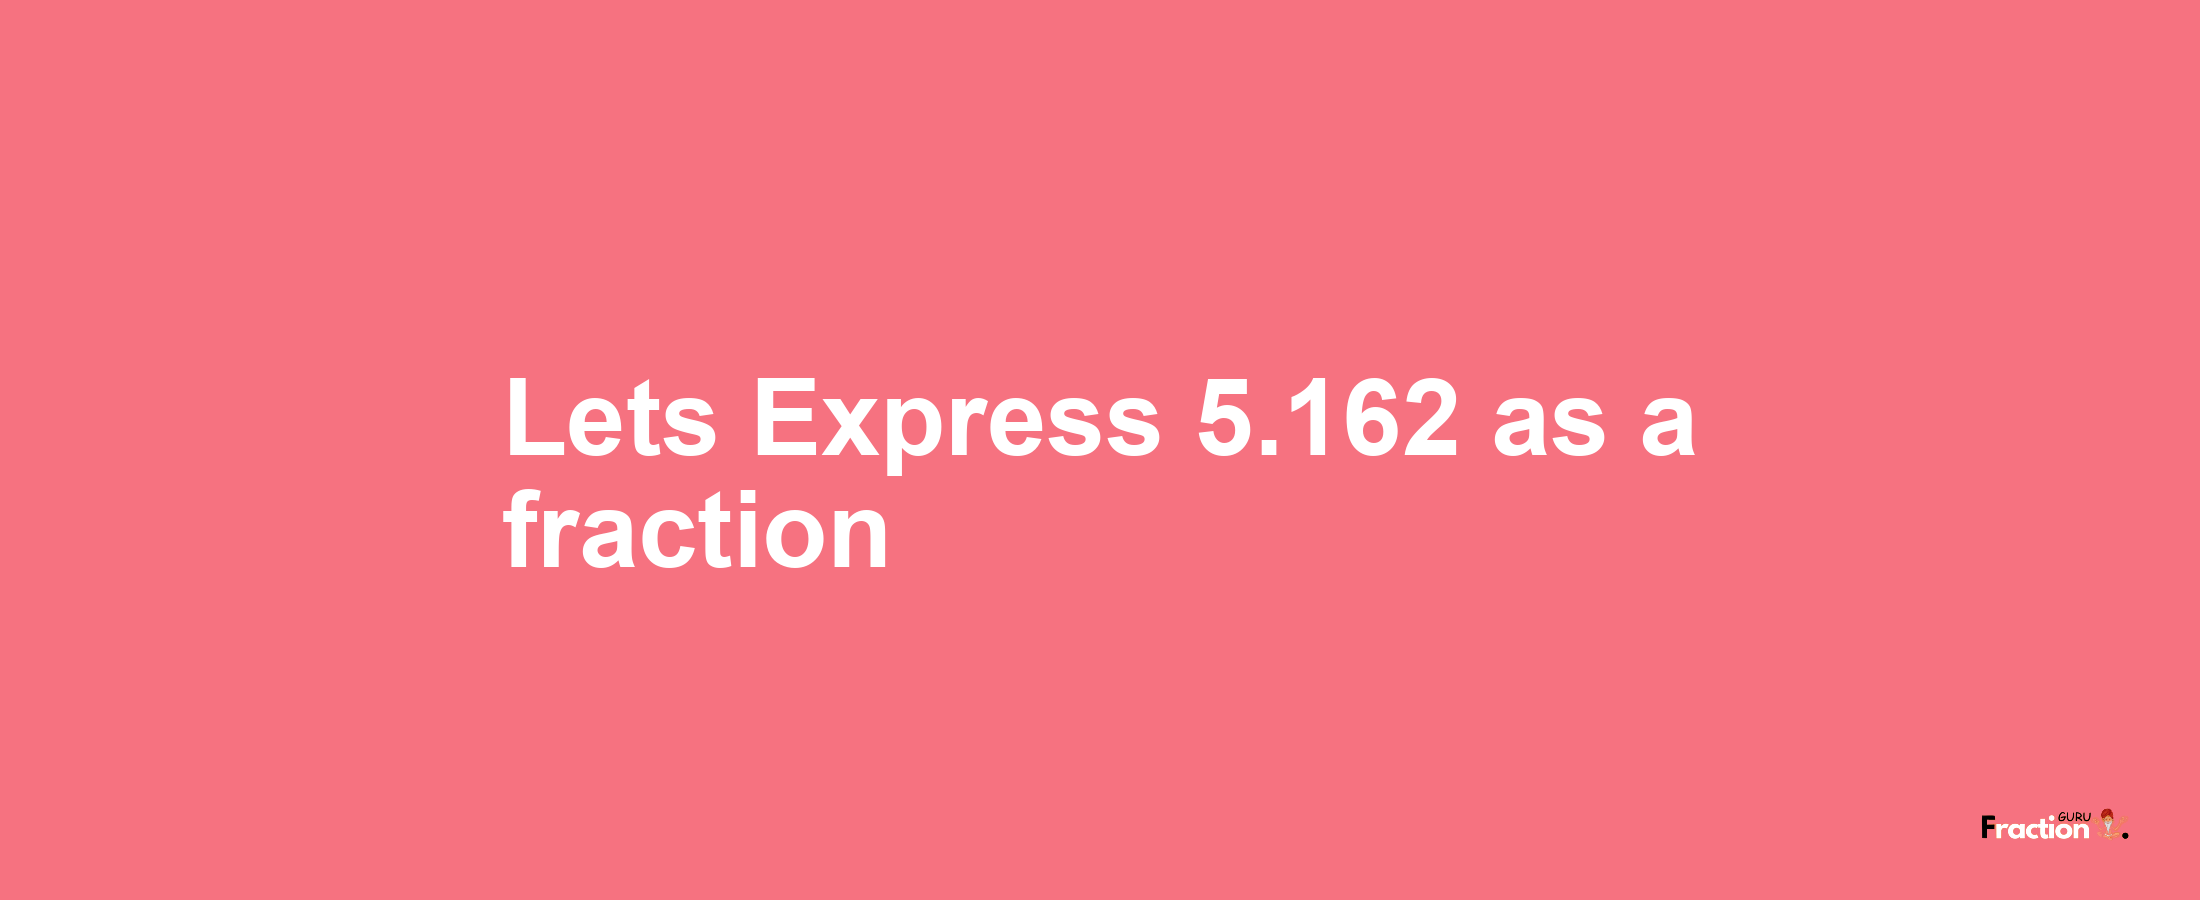 Lets Express 5.162 as afraction